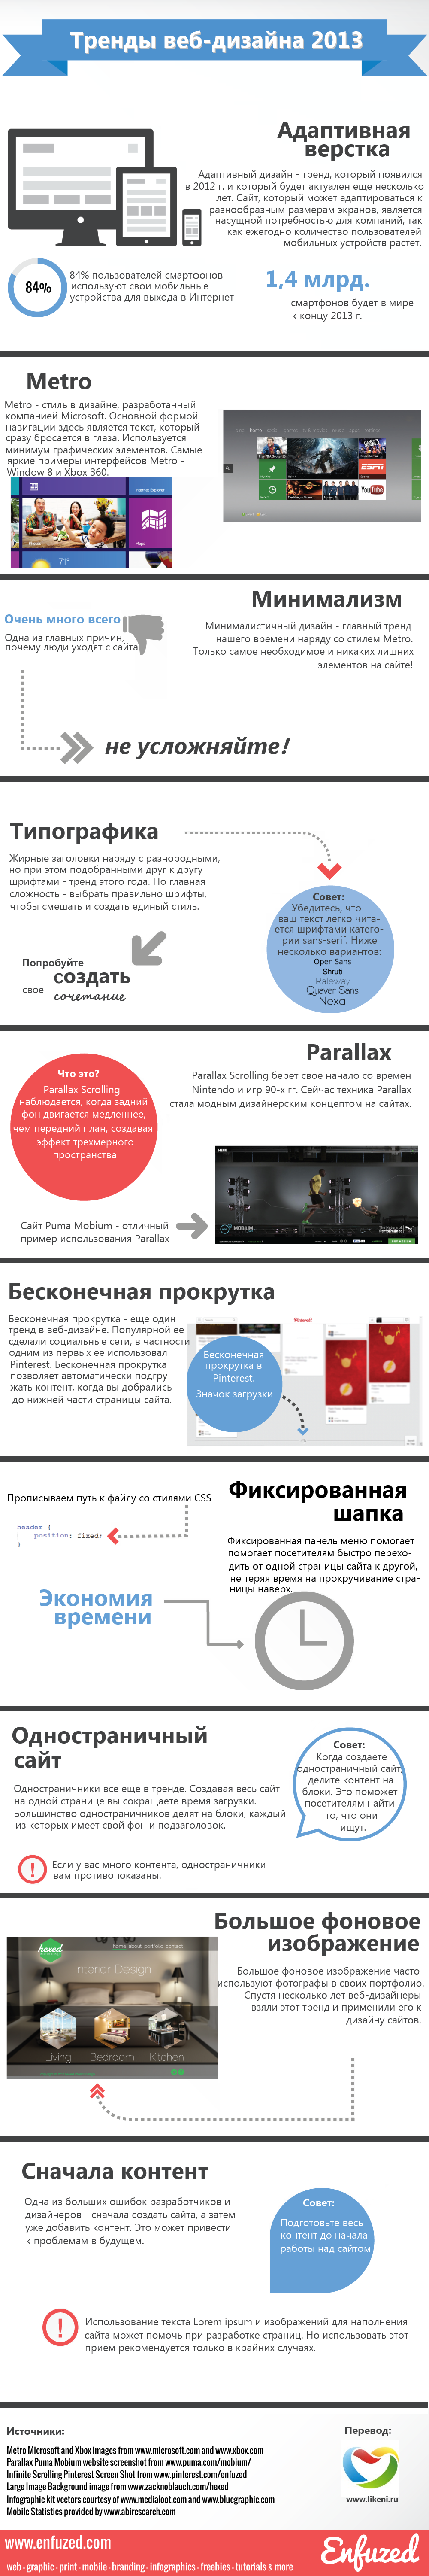 web-design-trends-for-2013.png